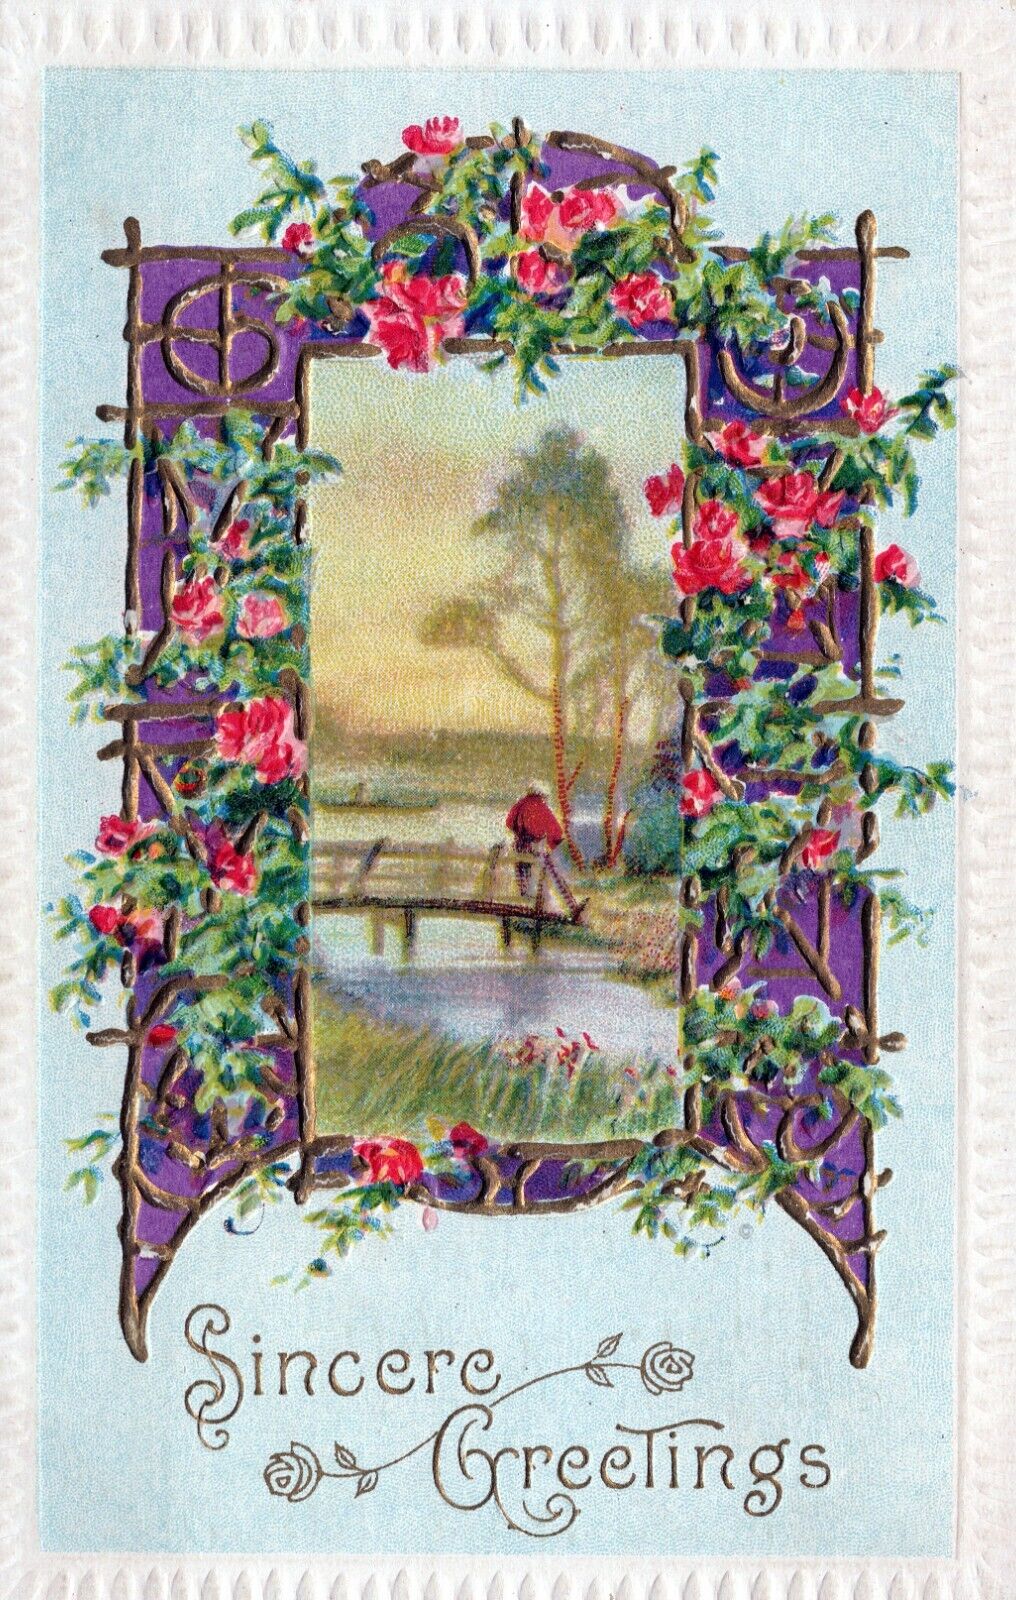 Sincere Greetings & Wishes Embossed Posted in 1912 Postcard